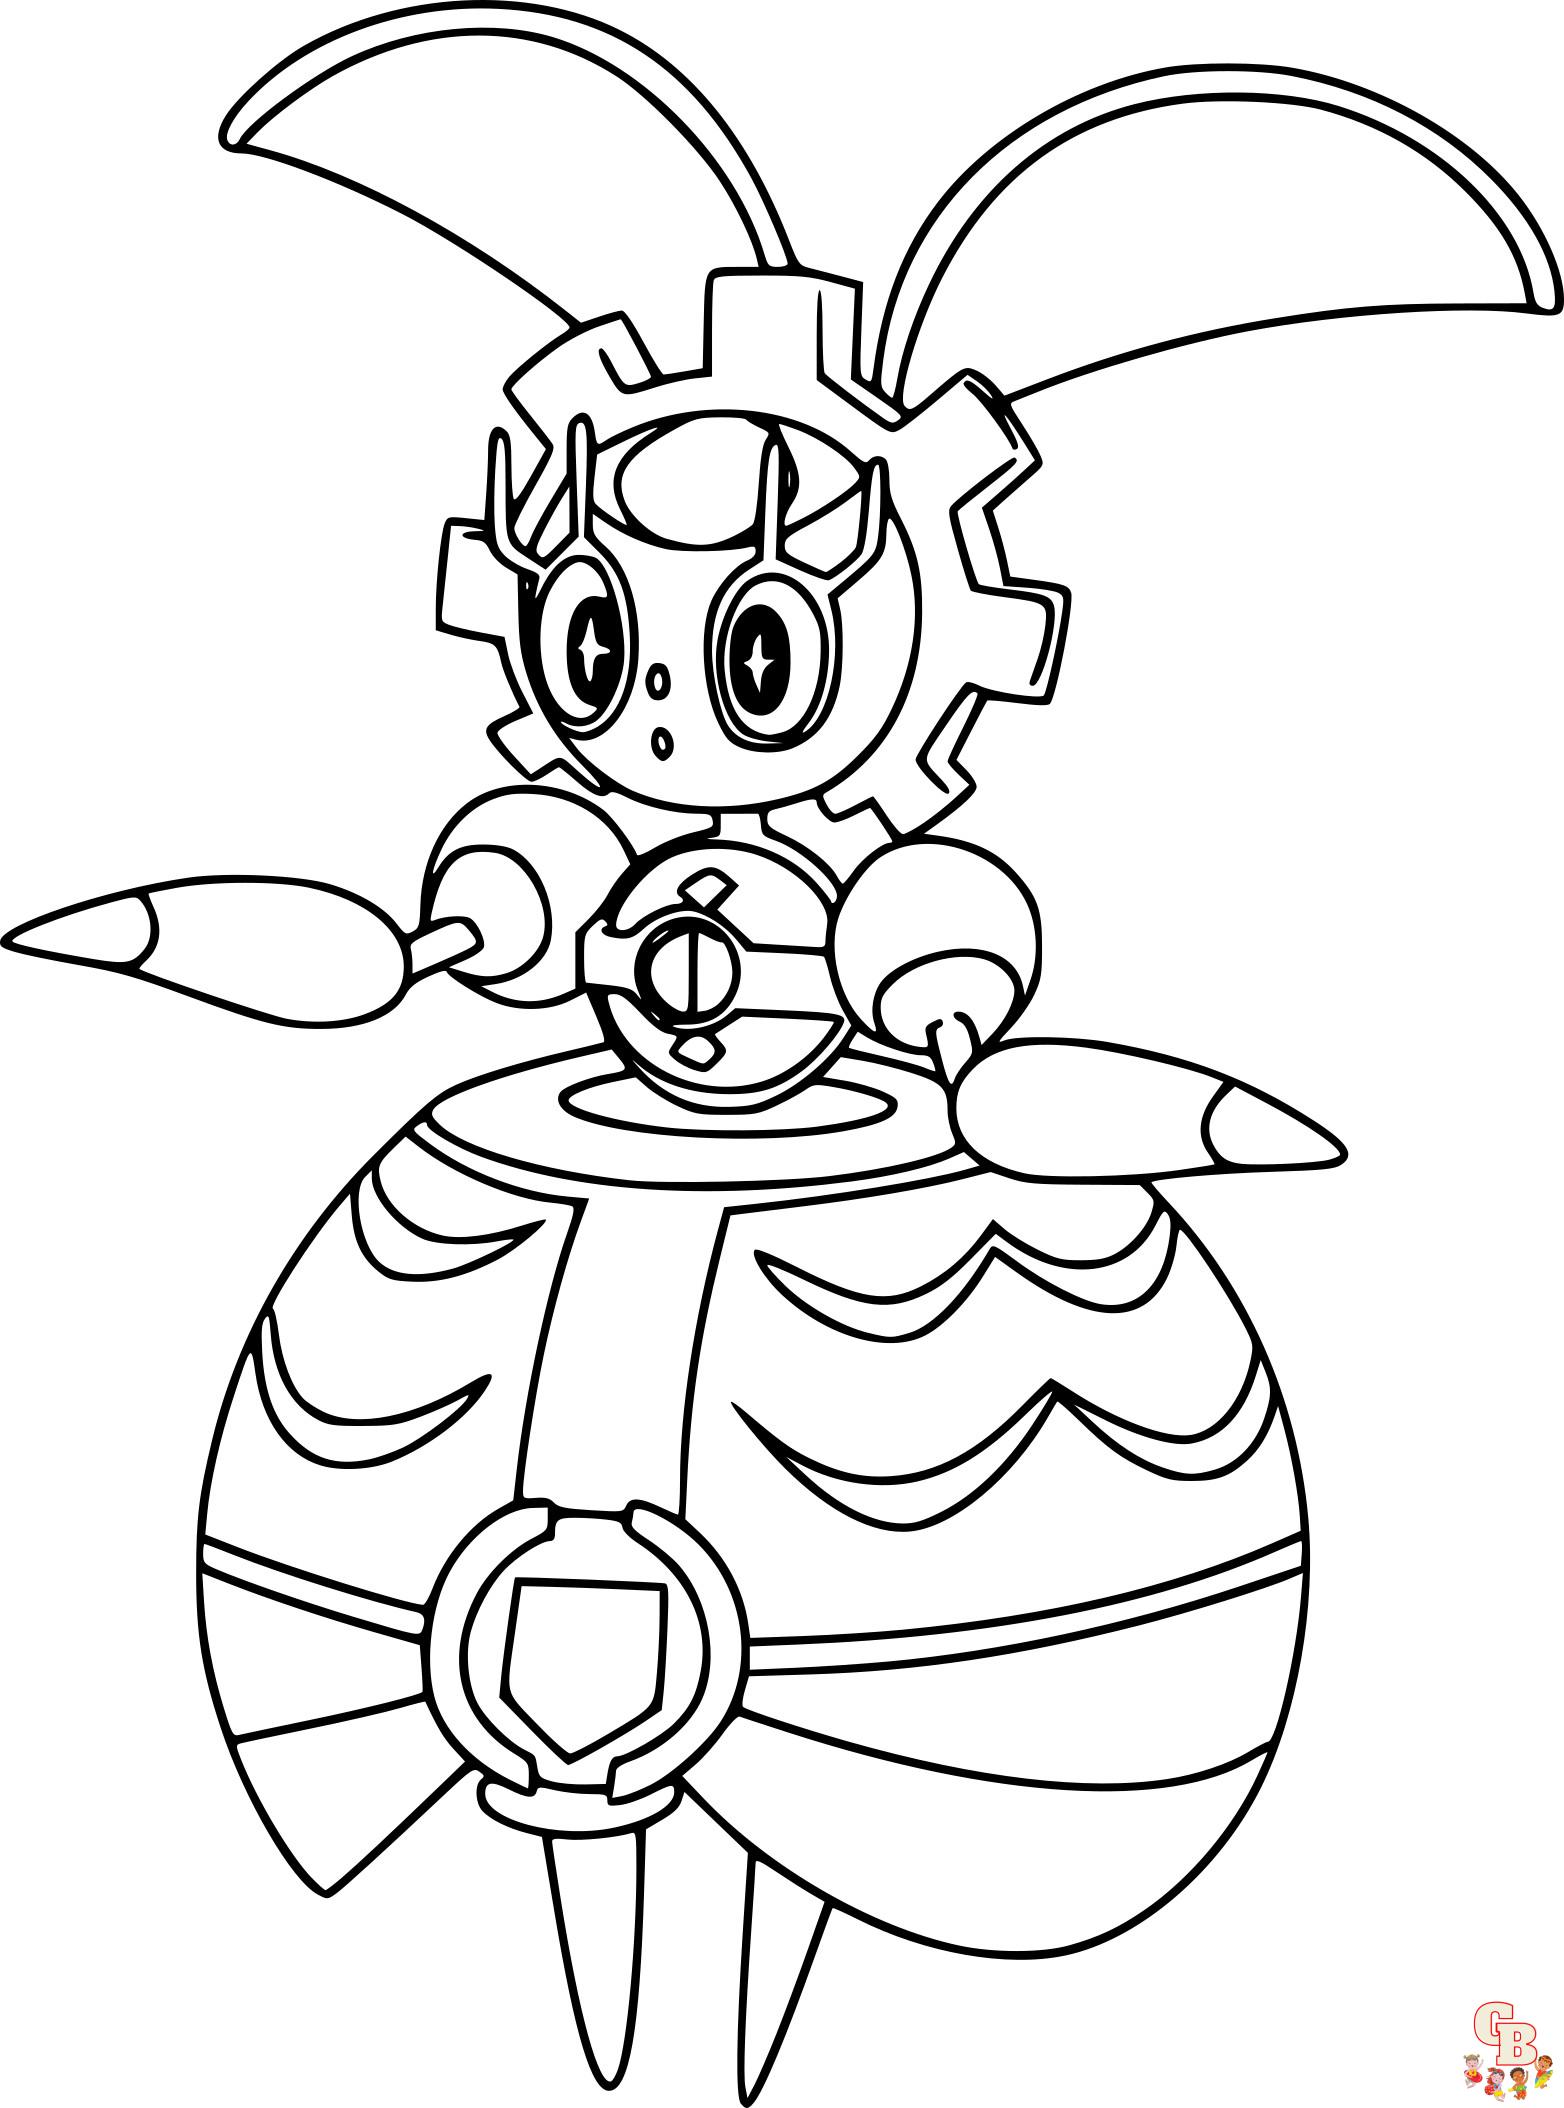 Pokemon Magearna coloring pages printable